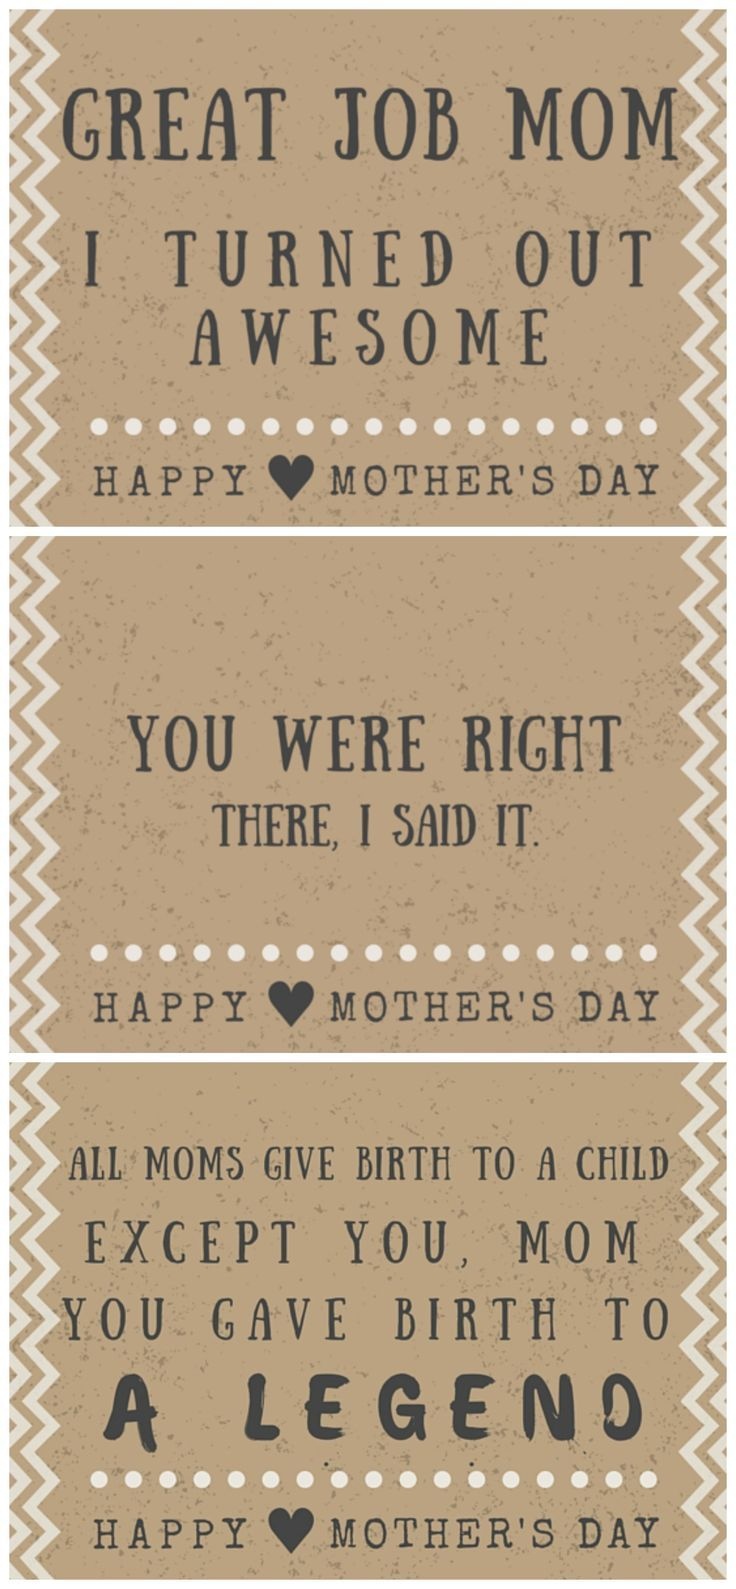 30 Funny Mother&amp;#039;s Day Cards - Free Printables With Hilarious Quotes - Free Printable Funny Mother&amp;#039;s Day Cards